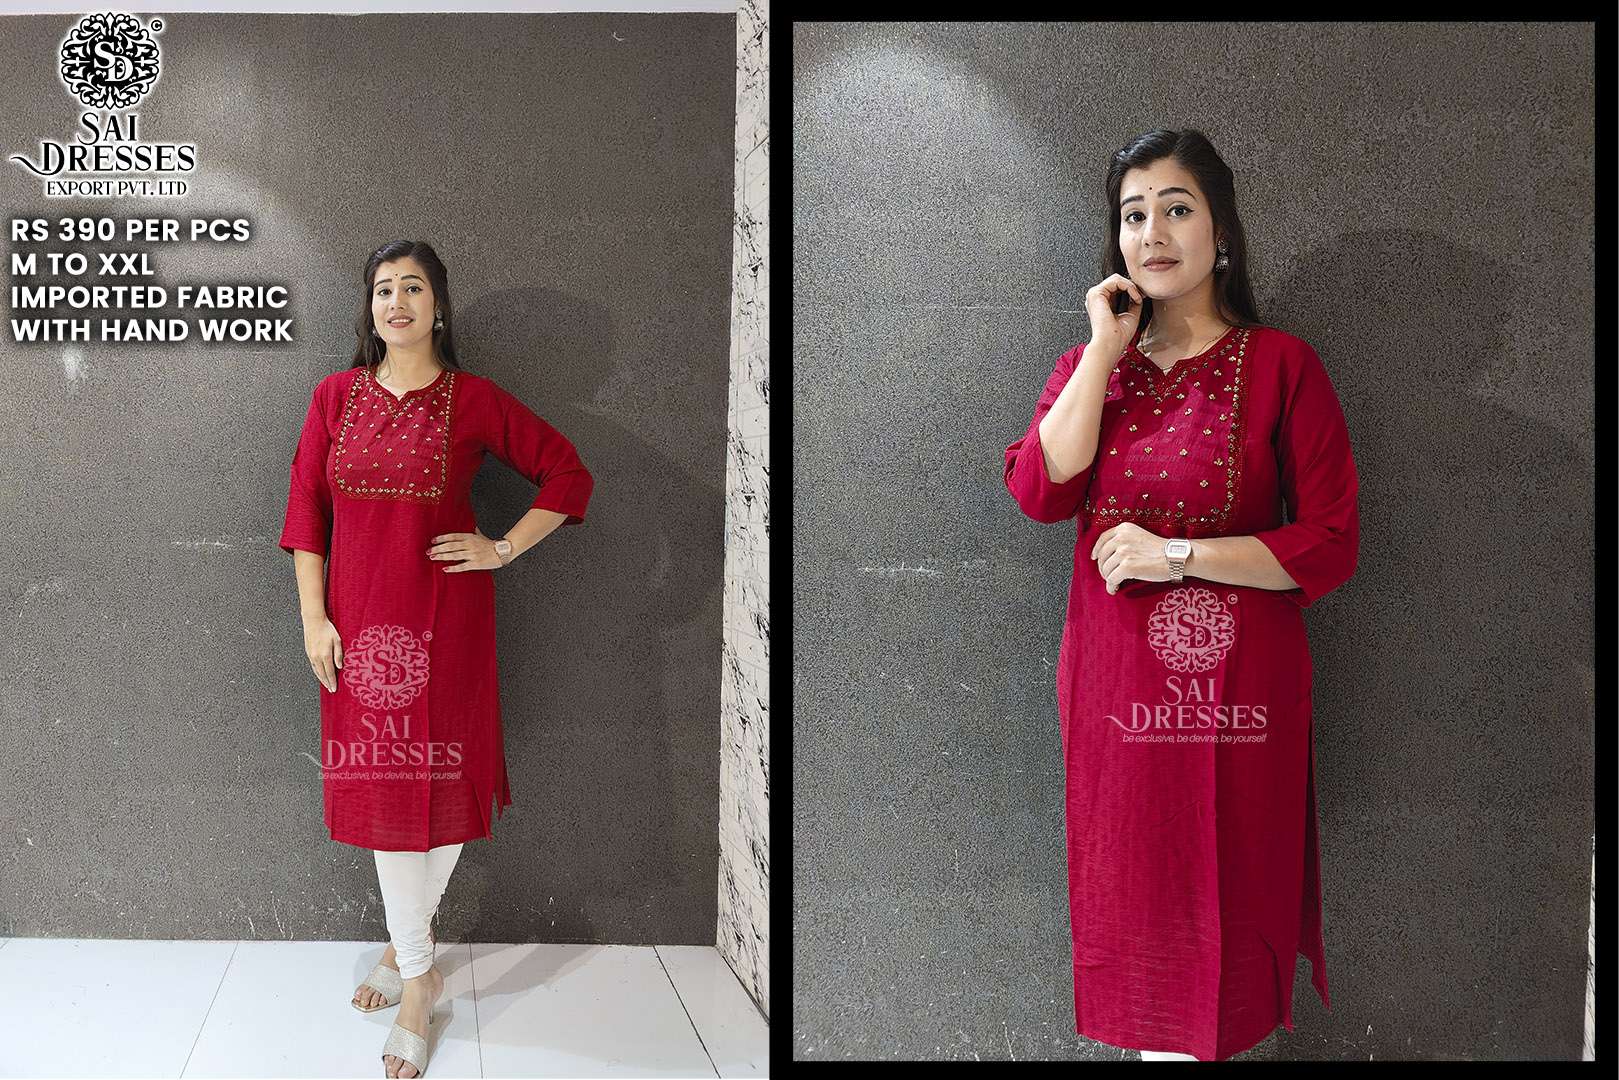 SAI DRESSES PRESENT D.NO SD73 READY TO WEAR BEAUTIFUL HANDWORK STRAIGHT KURTI COMBO COLLECTION IN WHOLESALE RATE IN SURAT